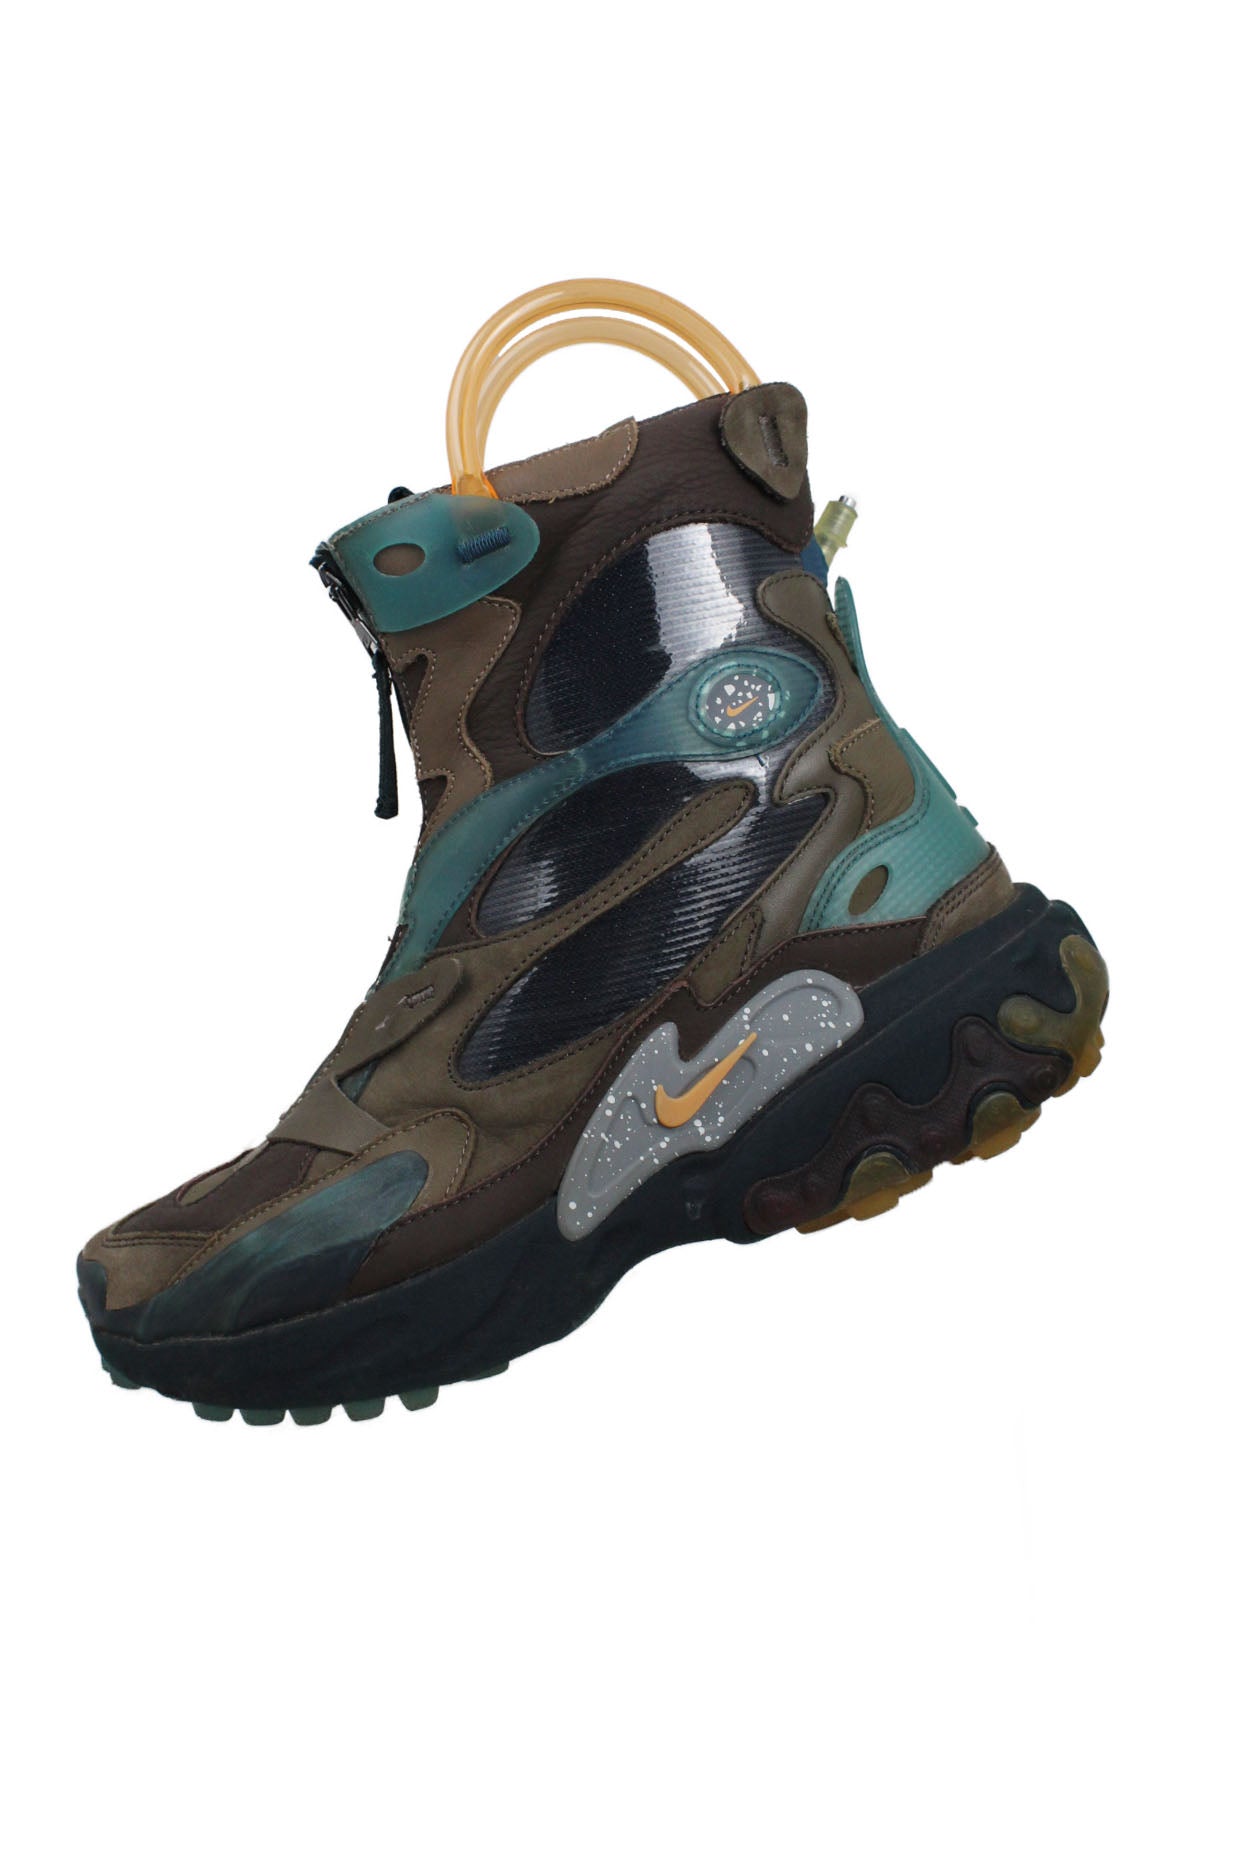 side view of nike x jun takahashi brown/aqua/multi ‘undercover x react boot’. features ‘nike’ logo tab at tongue, ‘undercover jun takahashi’ top zip pull tab closure, swooshes at sides, ‘u’ logo embossed at heel, and inflatable airbag around collar.